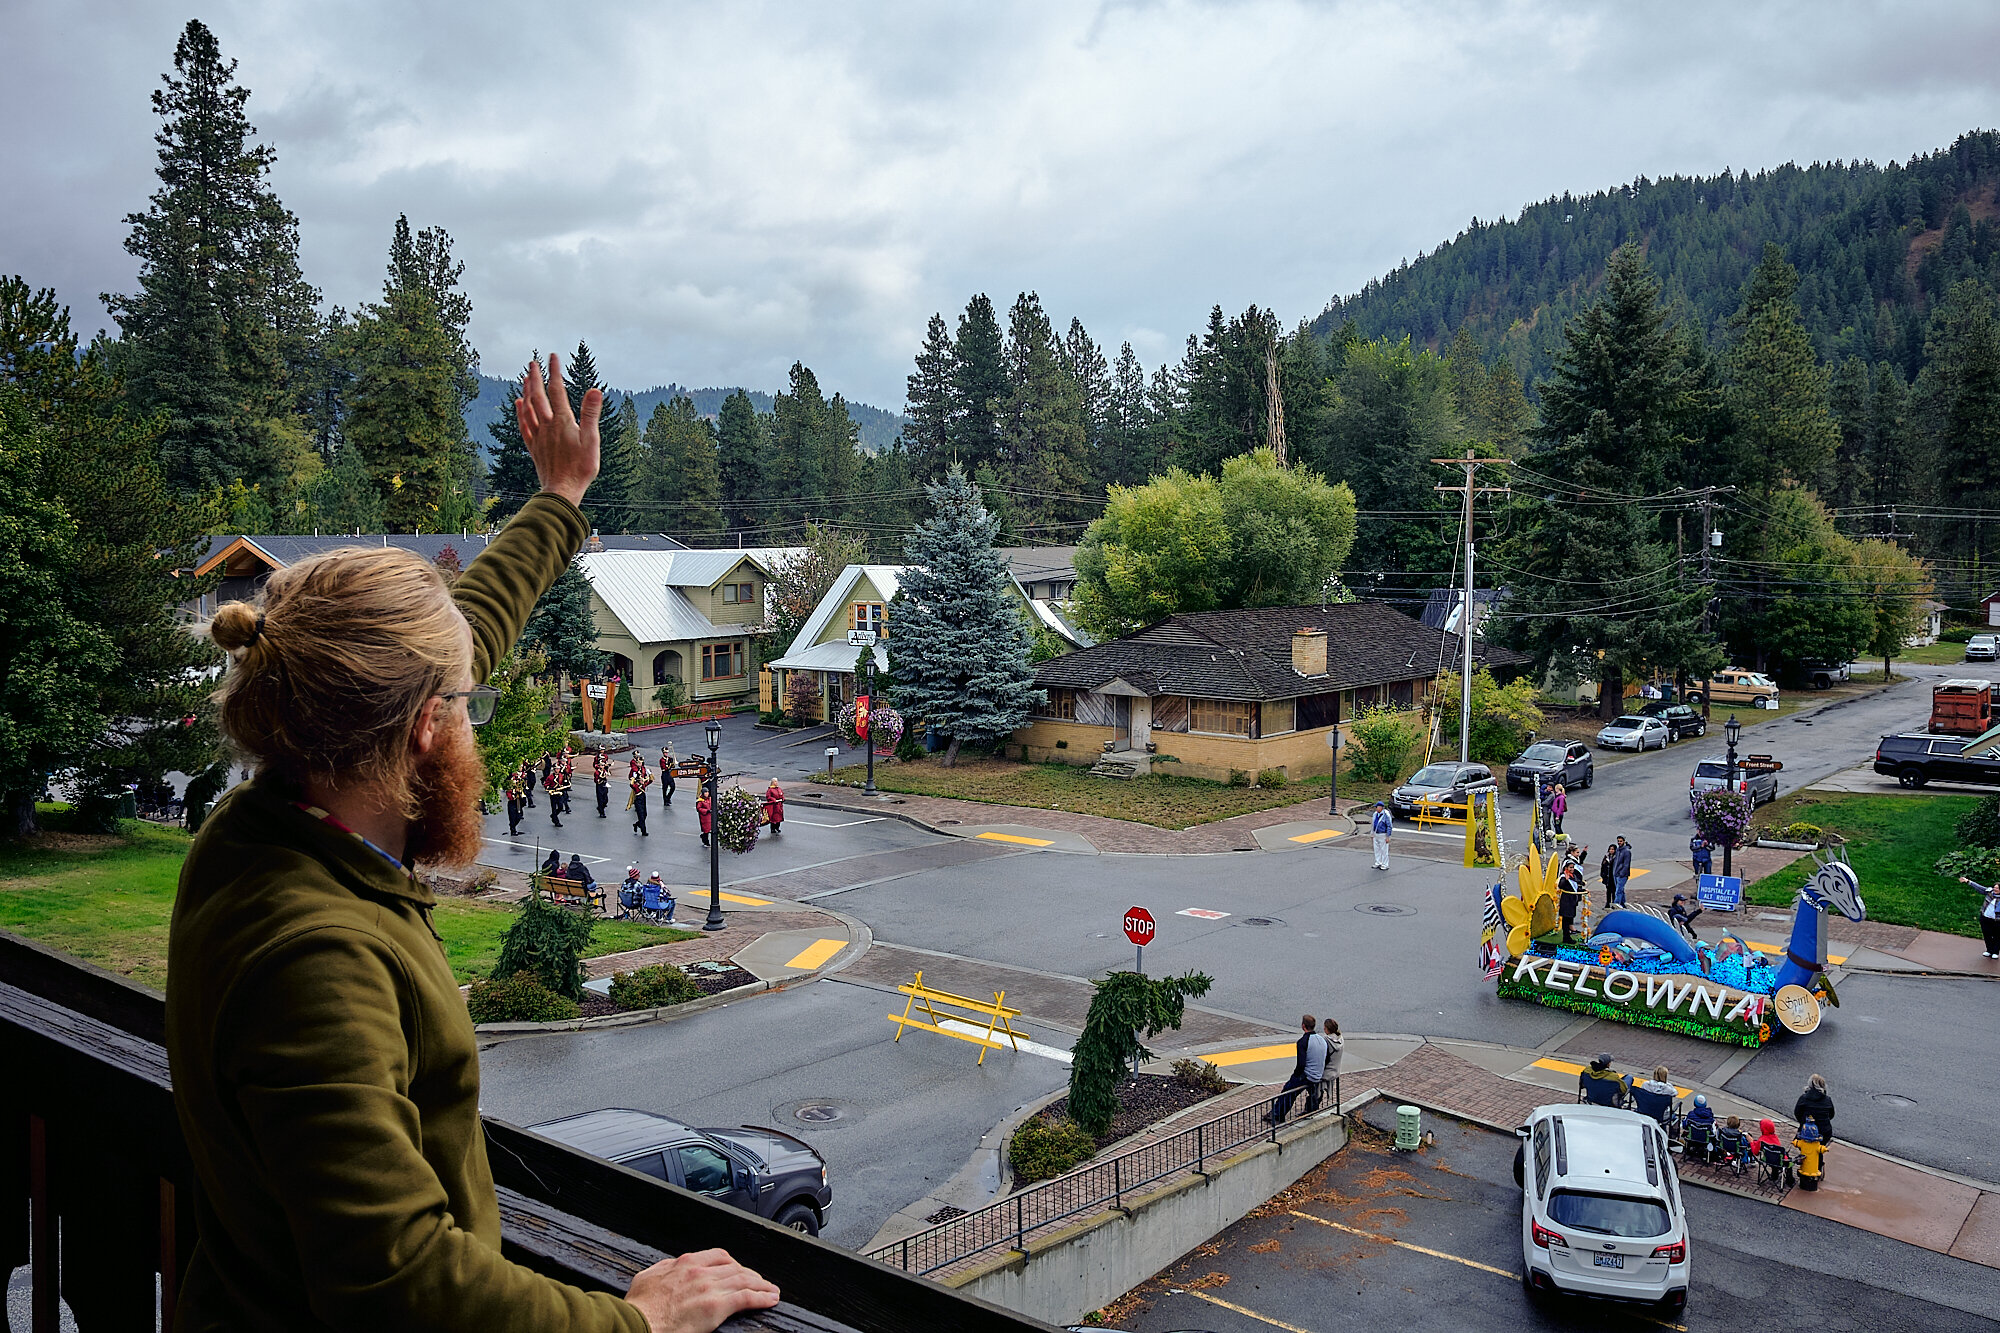  After getting pushed in to Leavenworth, WA to wait out a snowstorm, we were surprised by a very large parade right outside our room. Lebowski had a knack for getting into dance-offs with strangers. | 9/28/19 Mile 2,464.1, 4,053' 